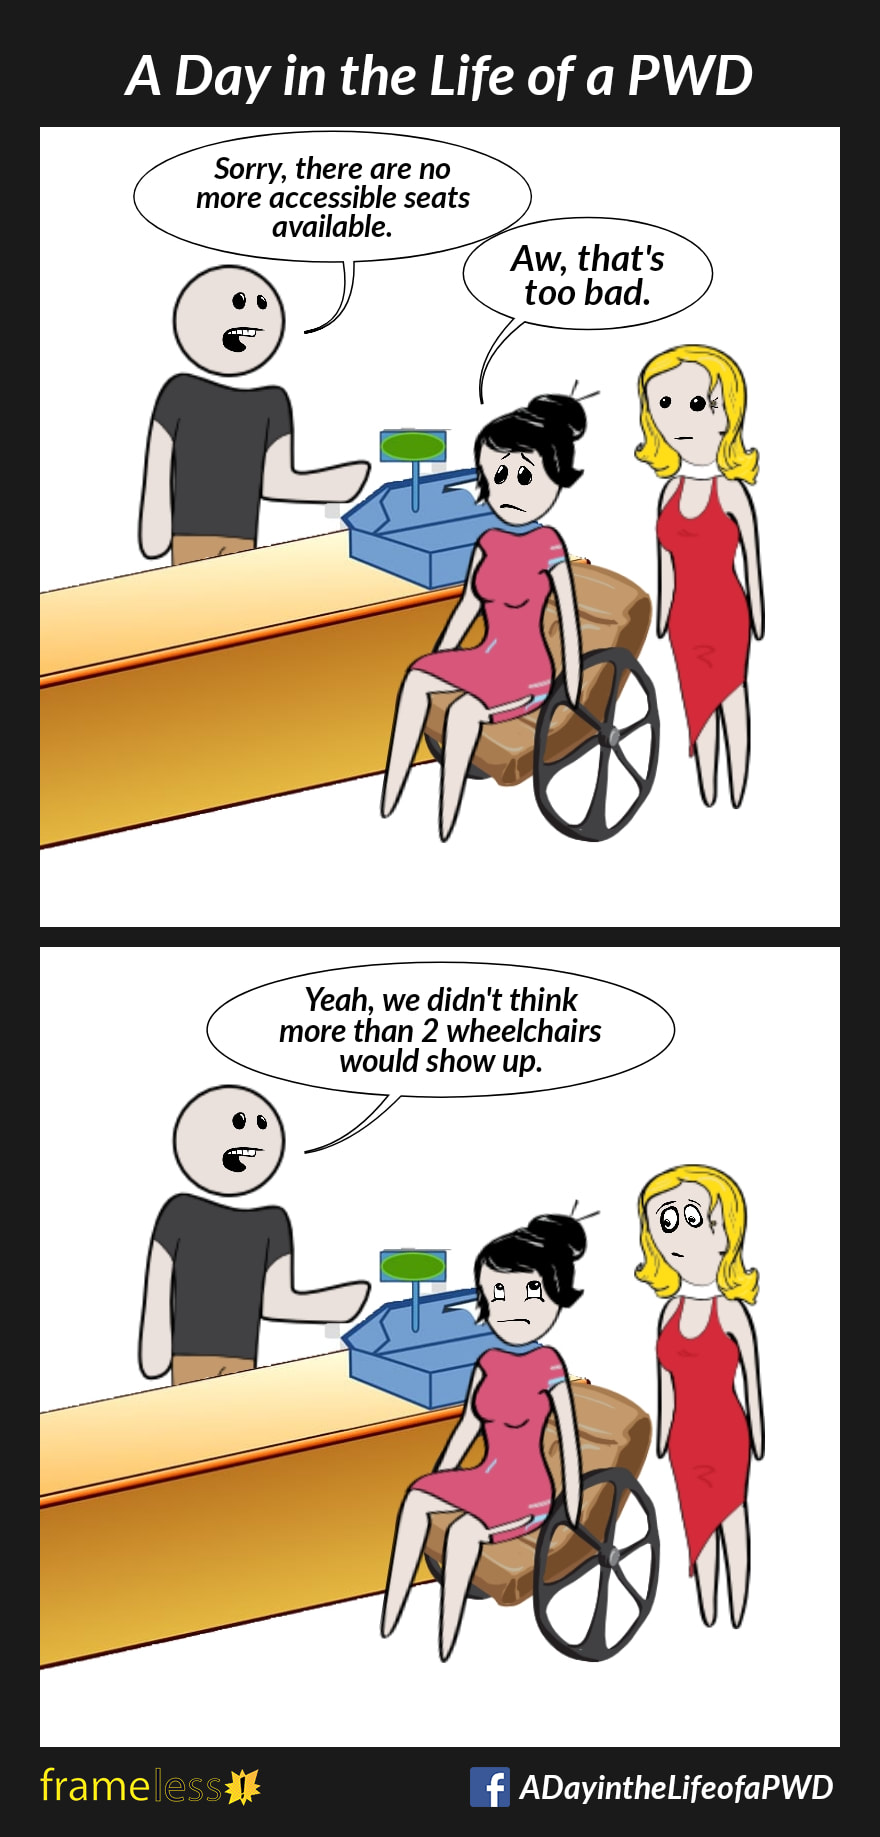 COMIC STRIP 
A Day in the Life of a PWD (Person With a Disability) 

Frame 1:
A woman in a wheelchair and her friend are purchasing tickets for a show.
CASHIER: Sorry, there are no more accessible seats available. 
WOMAN: Aw, that's too bad.

Frame 2:
CASHIER: Yeah, we didn't think more than 2 wheelchairs would show up.
The woman rolls her eyes.